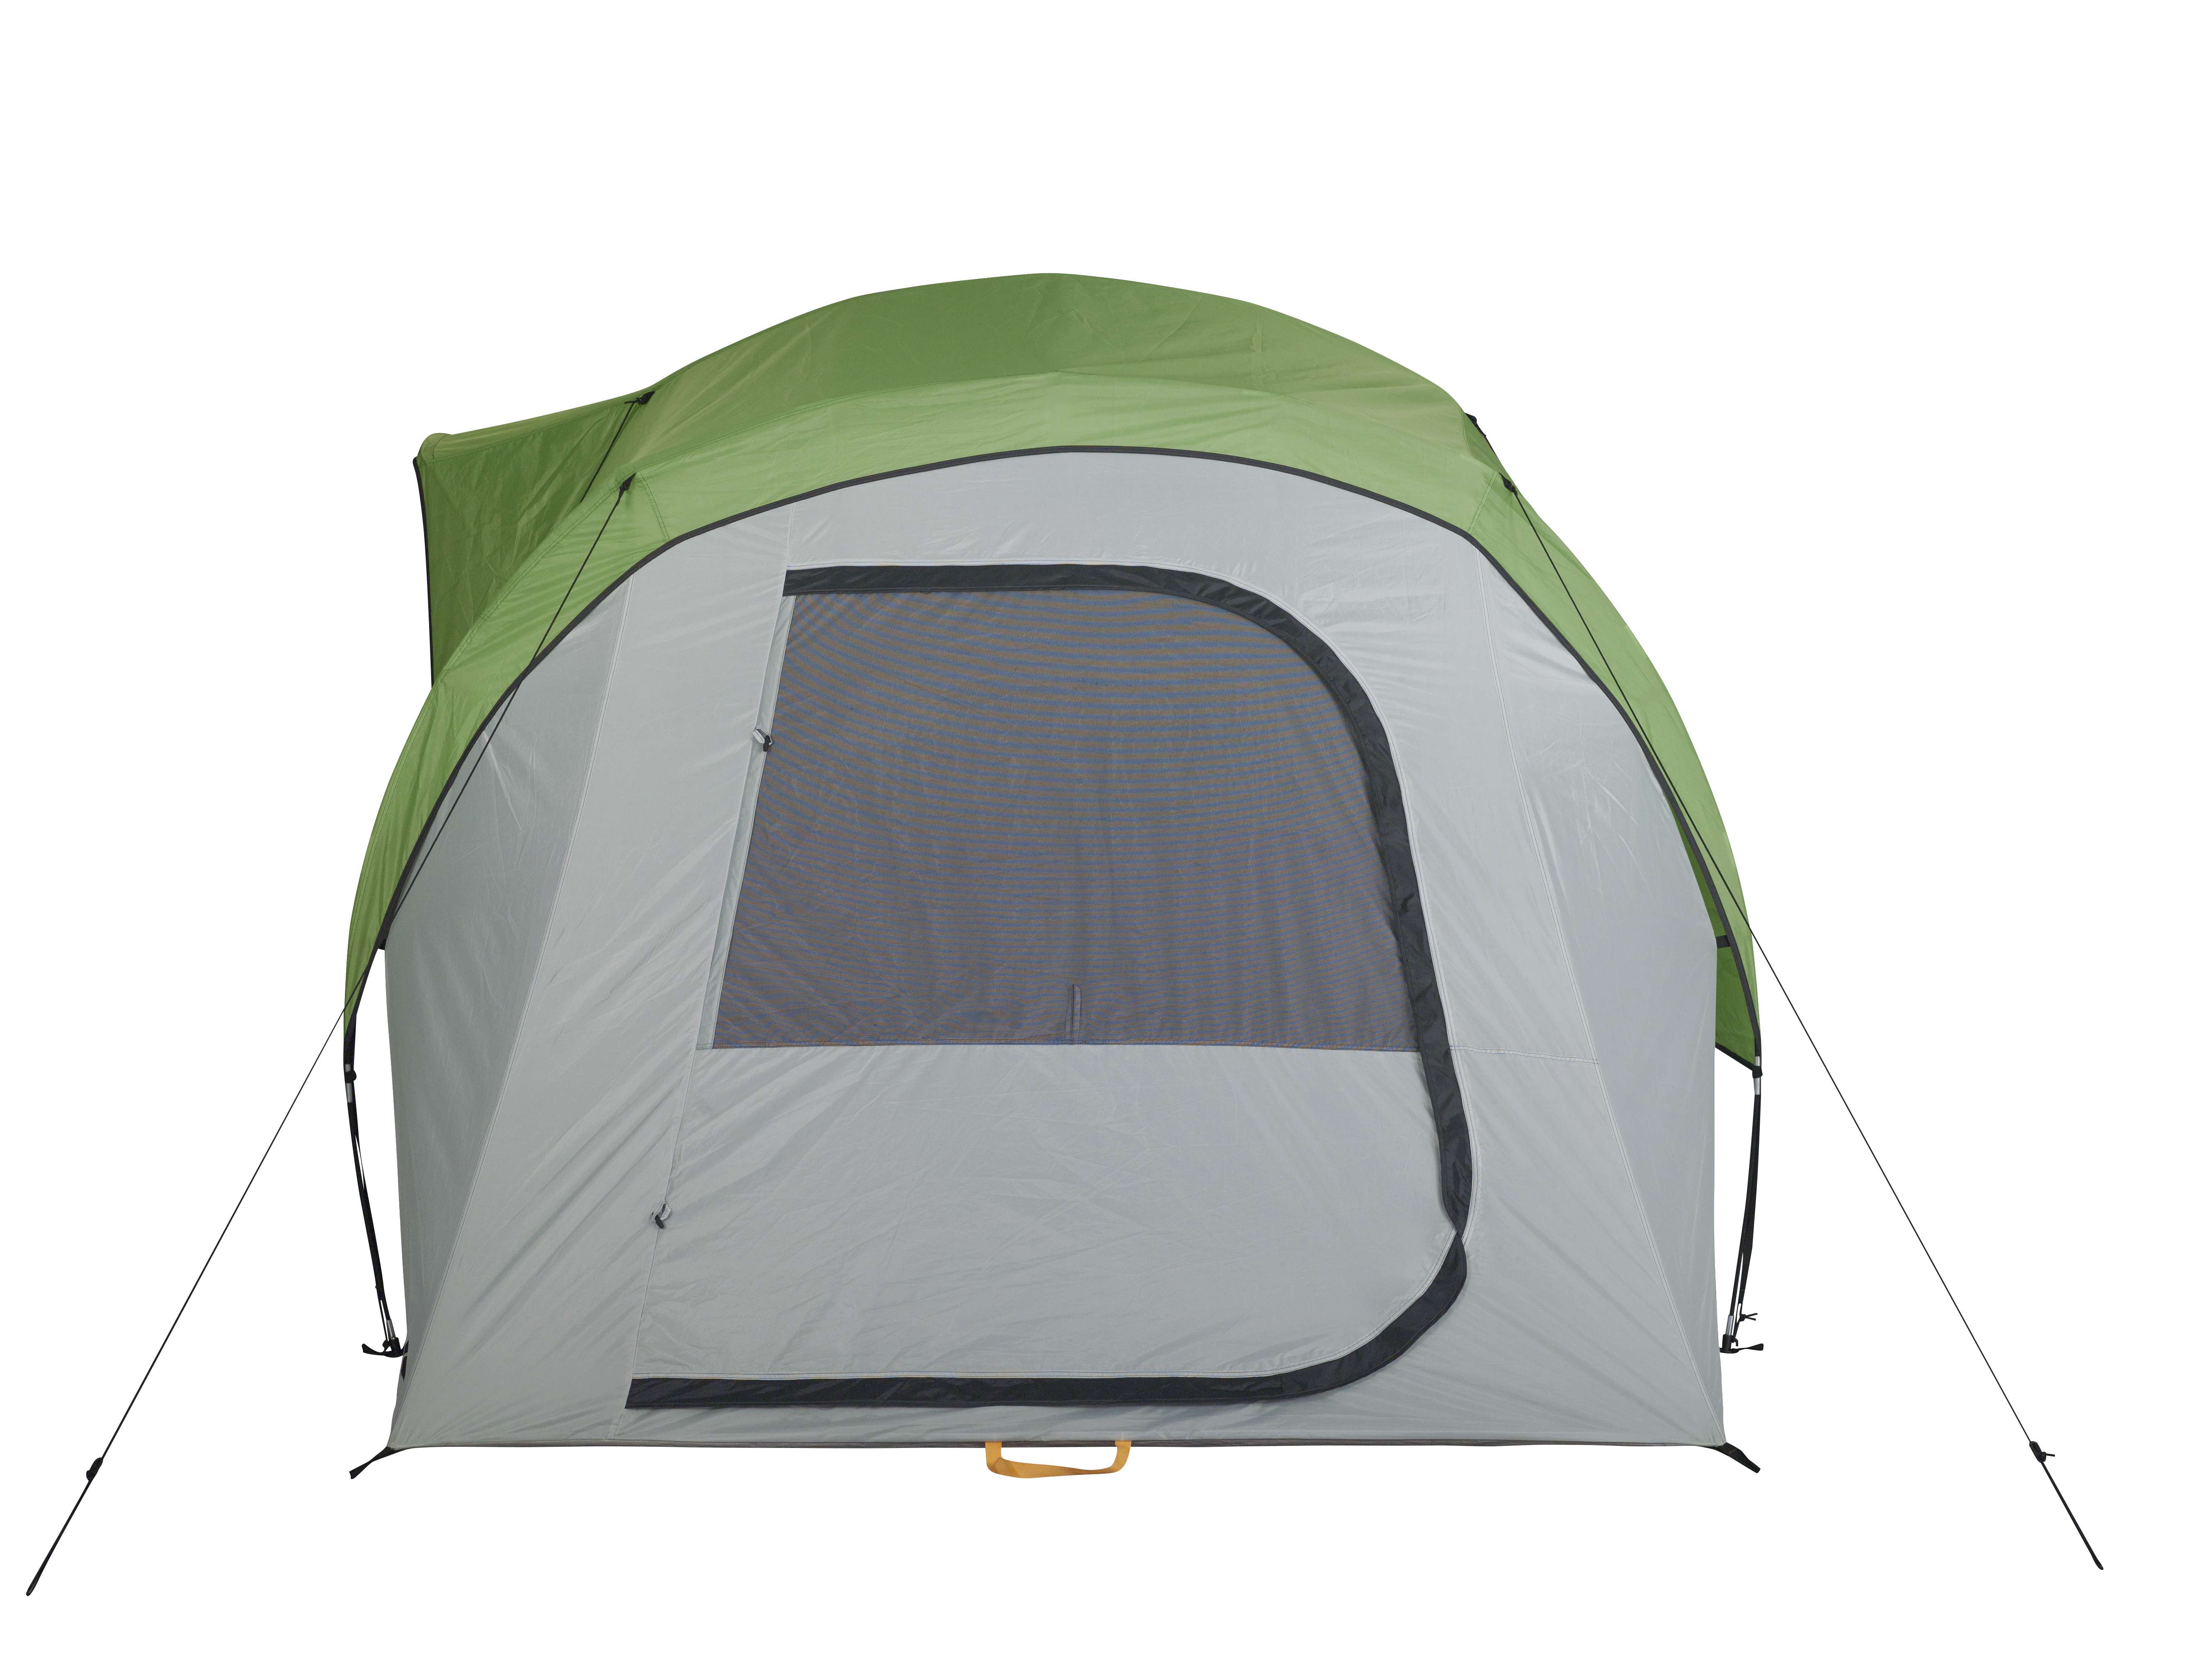 Ozark Trail 8 Person, Clip & Camp Family Tent, 16 ft. x 8 ft. x 78 in., 23.81 lbs. - image 4 of 15